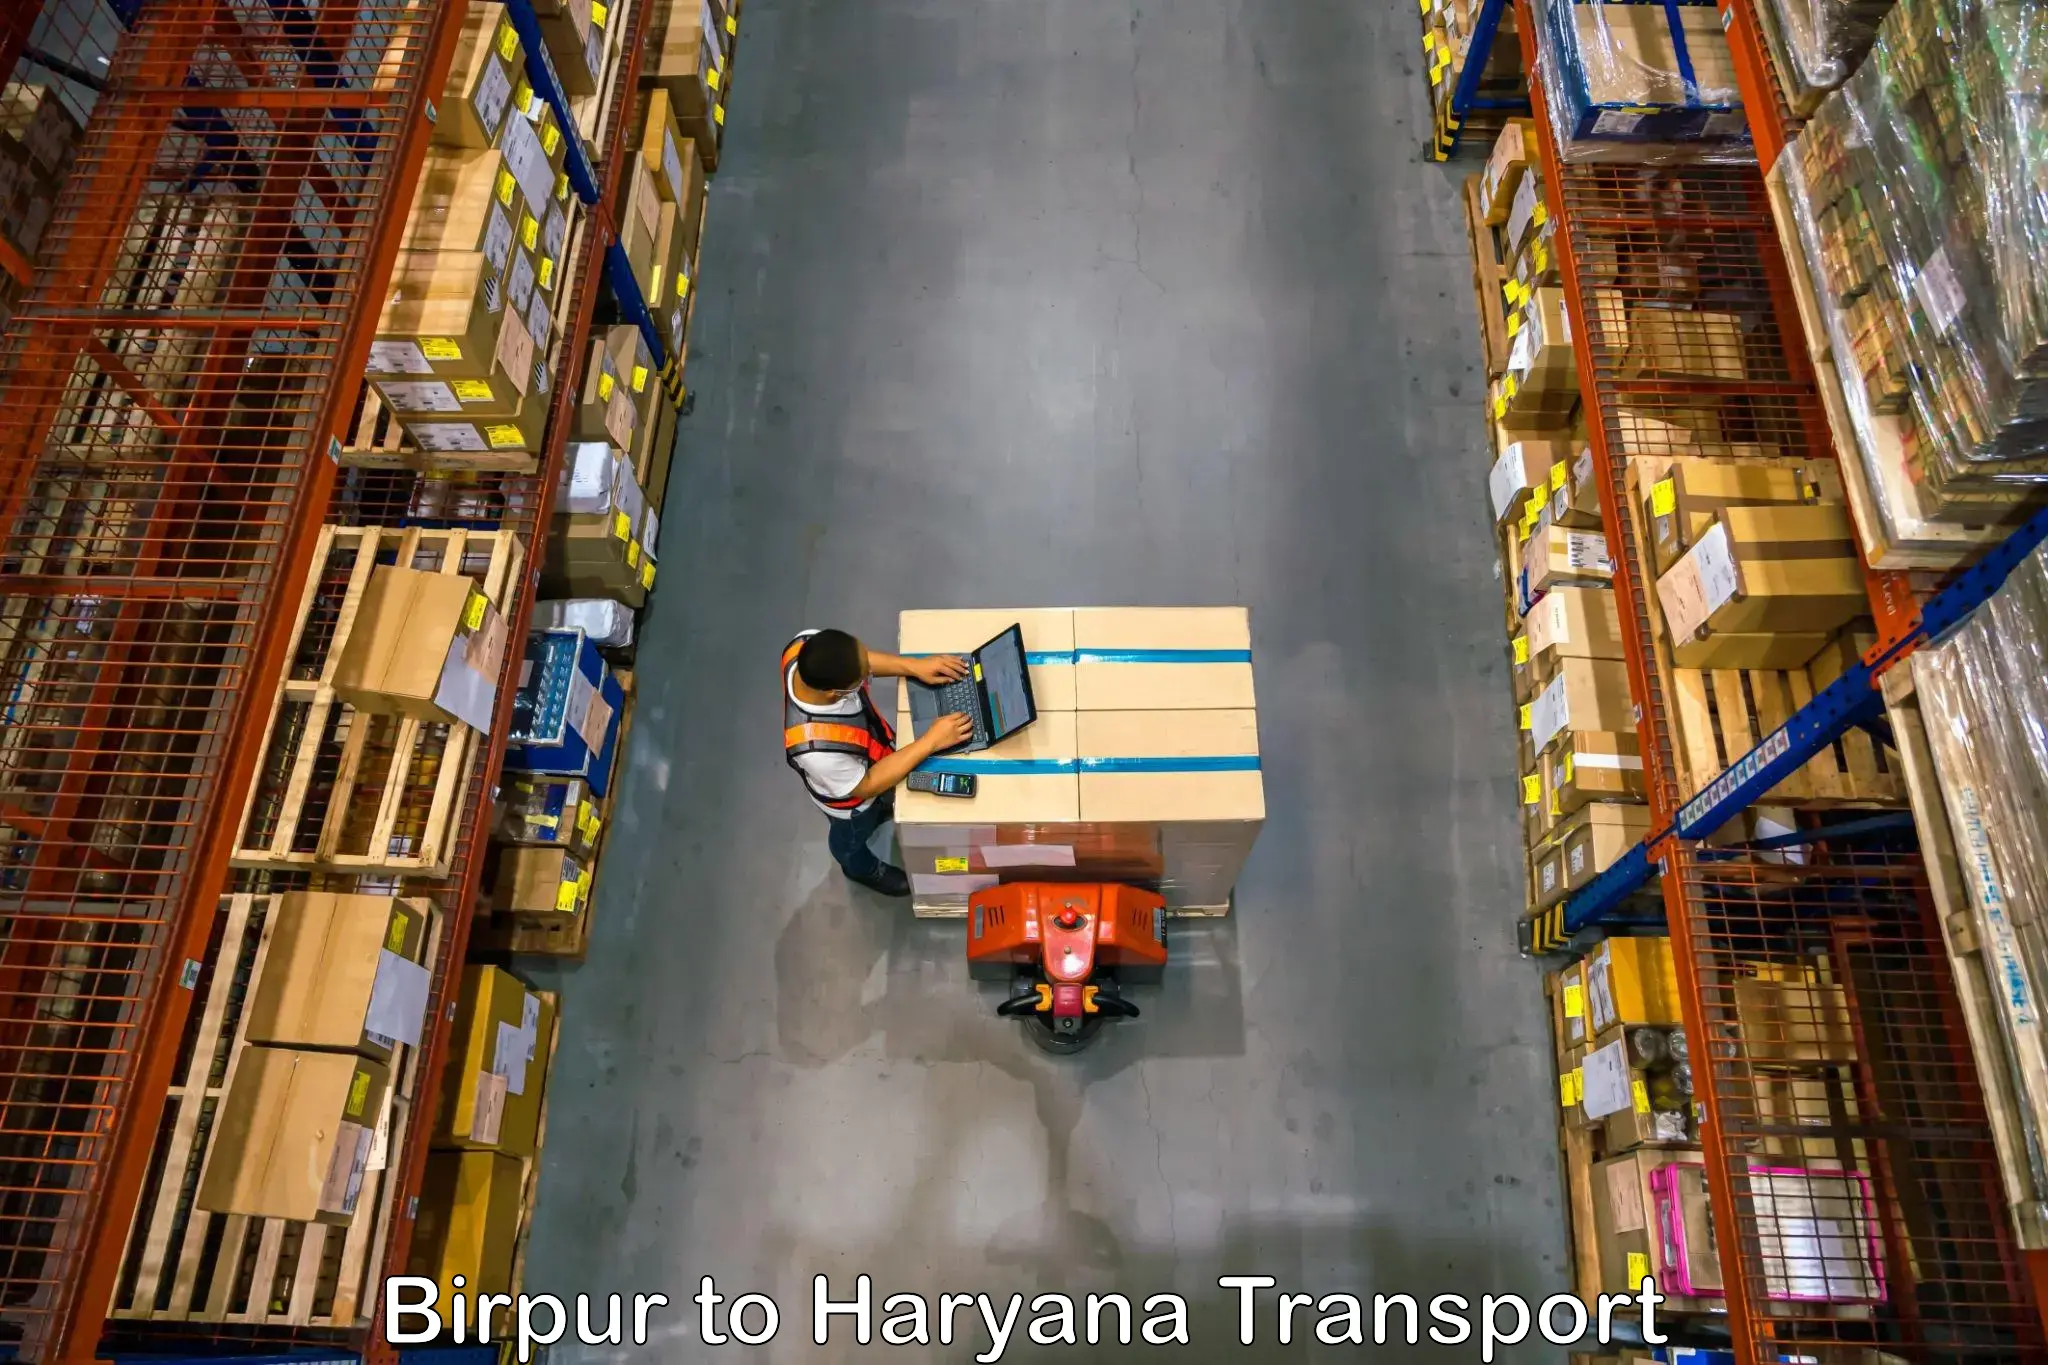 Container transport service Birpur to Ambala